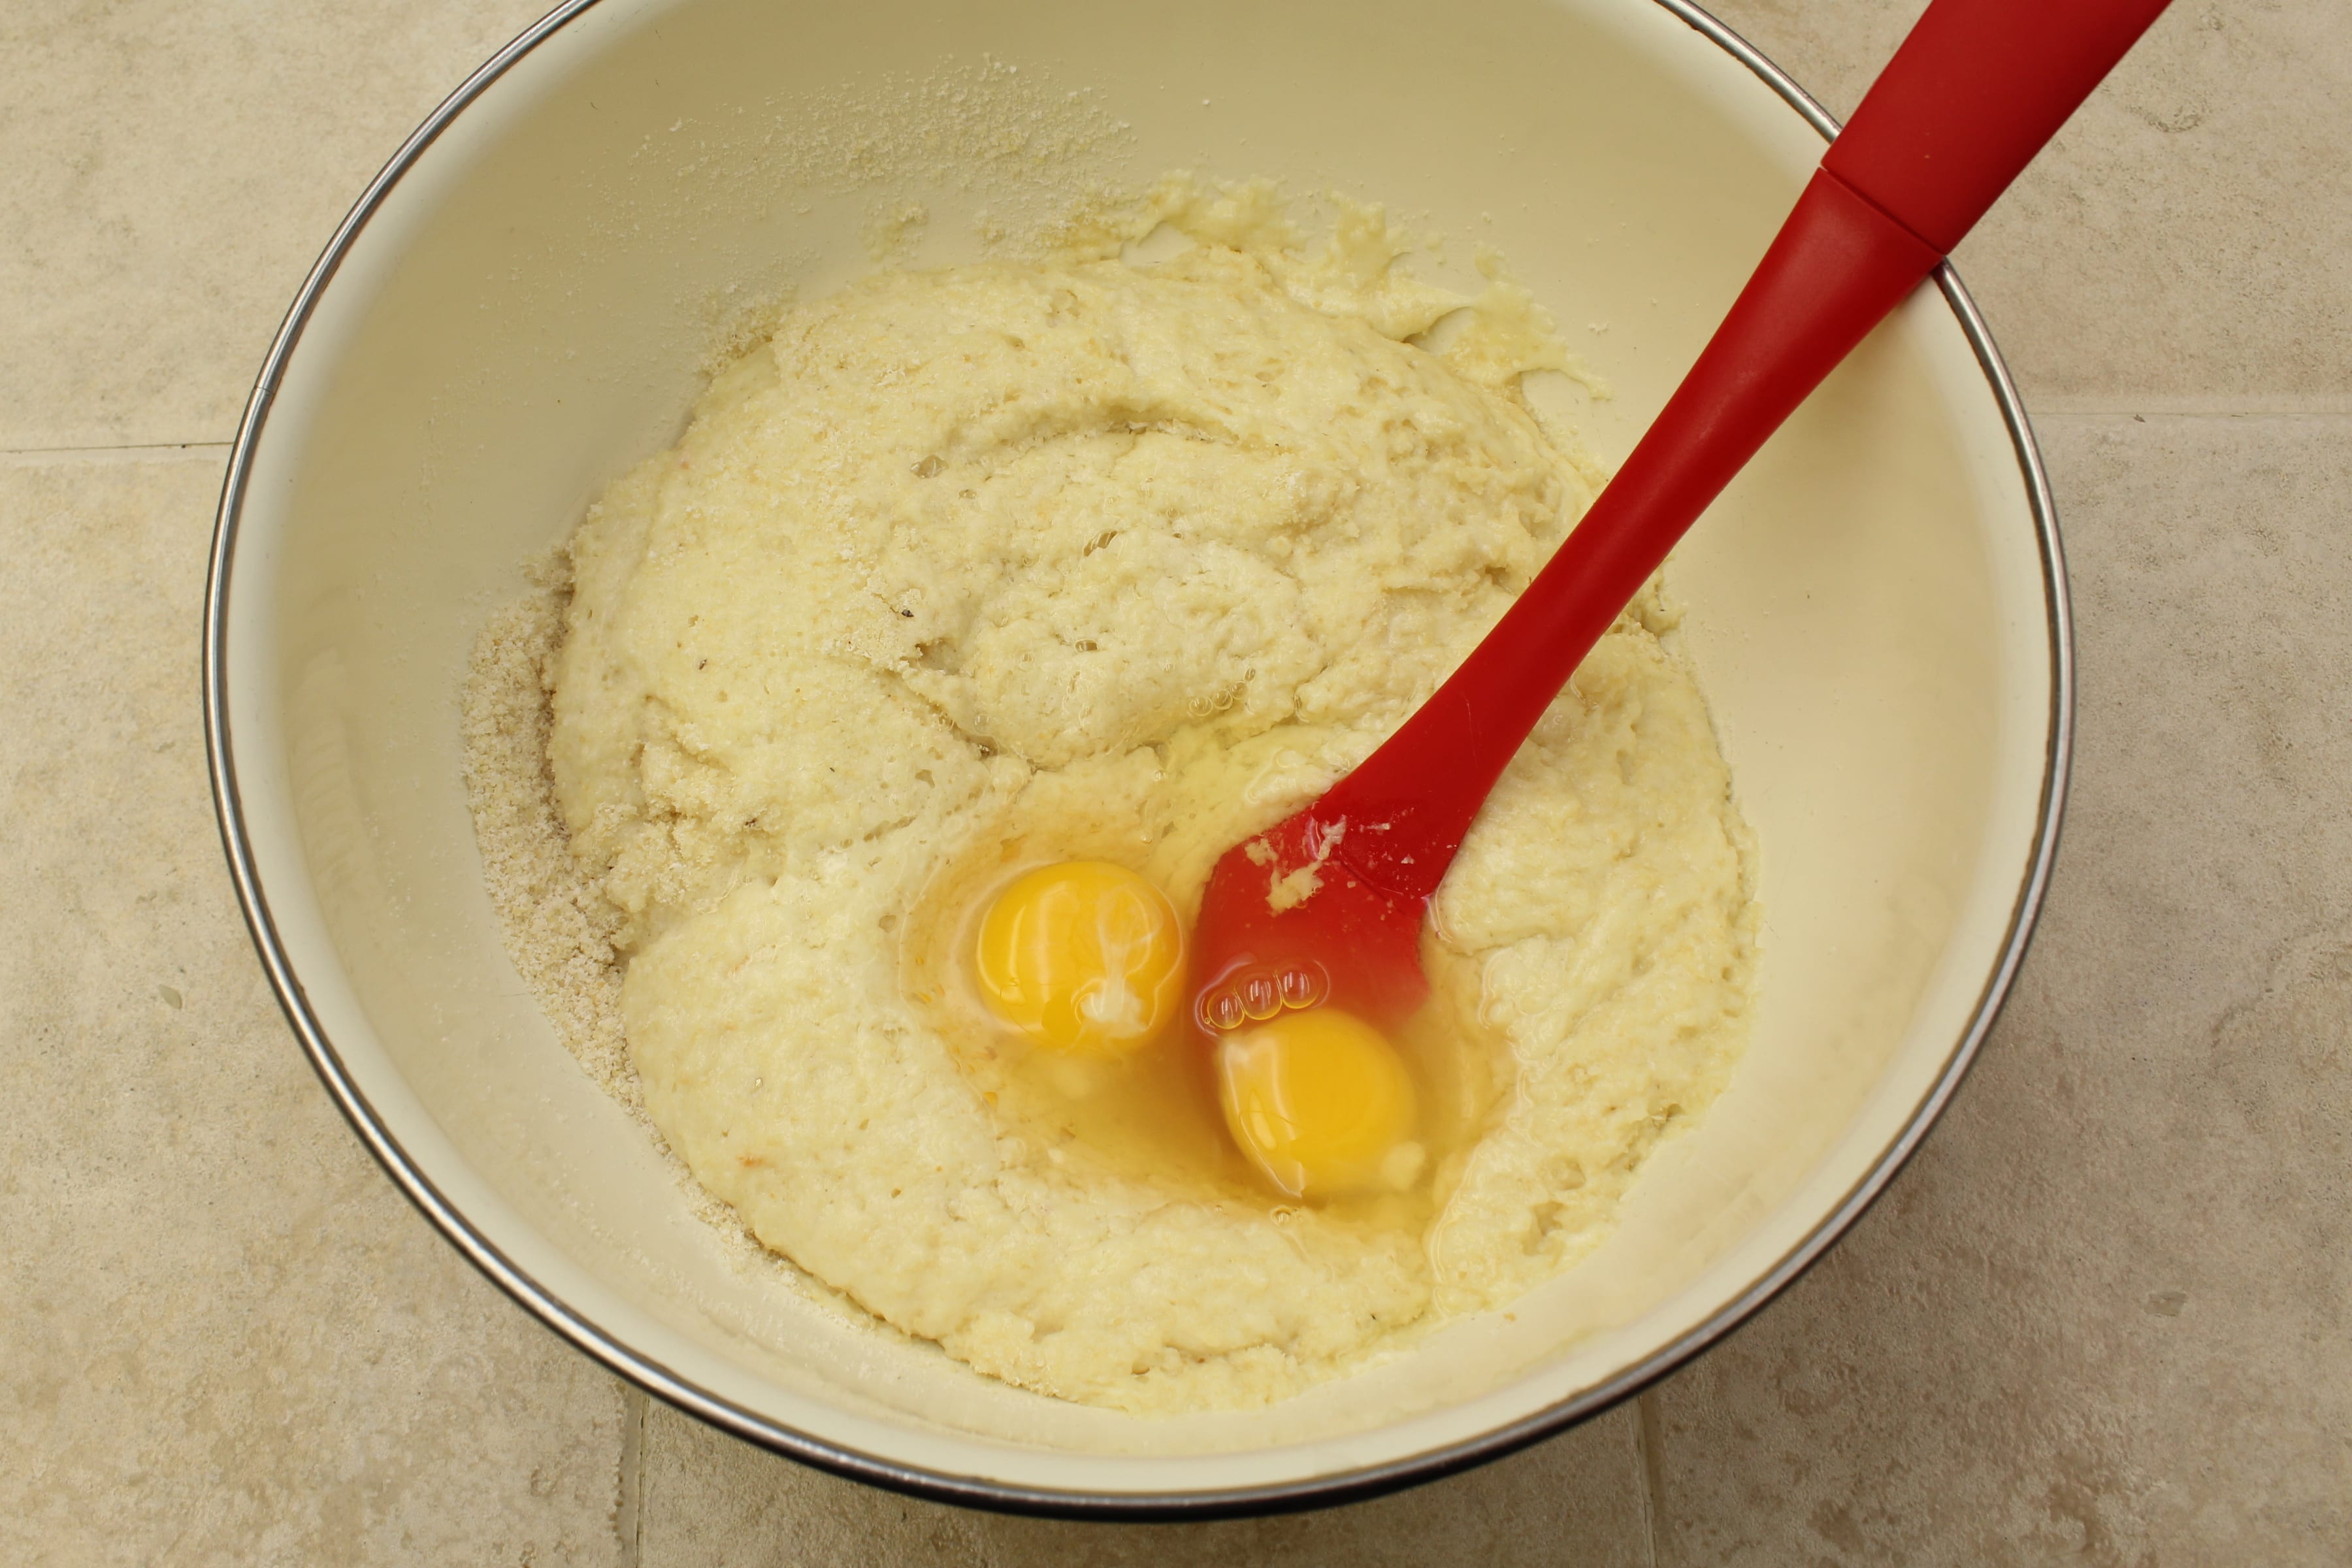 Eggs and almond powder for low-carb baking recipes 